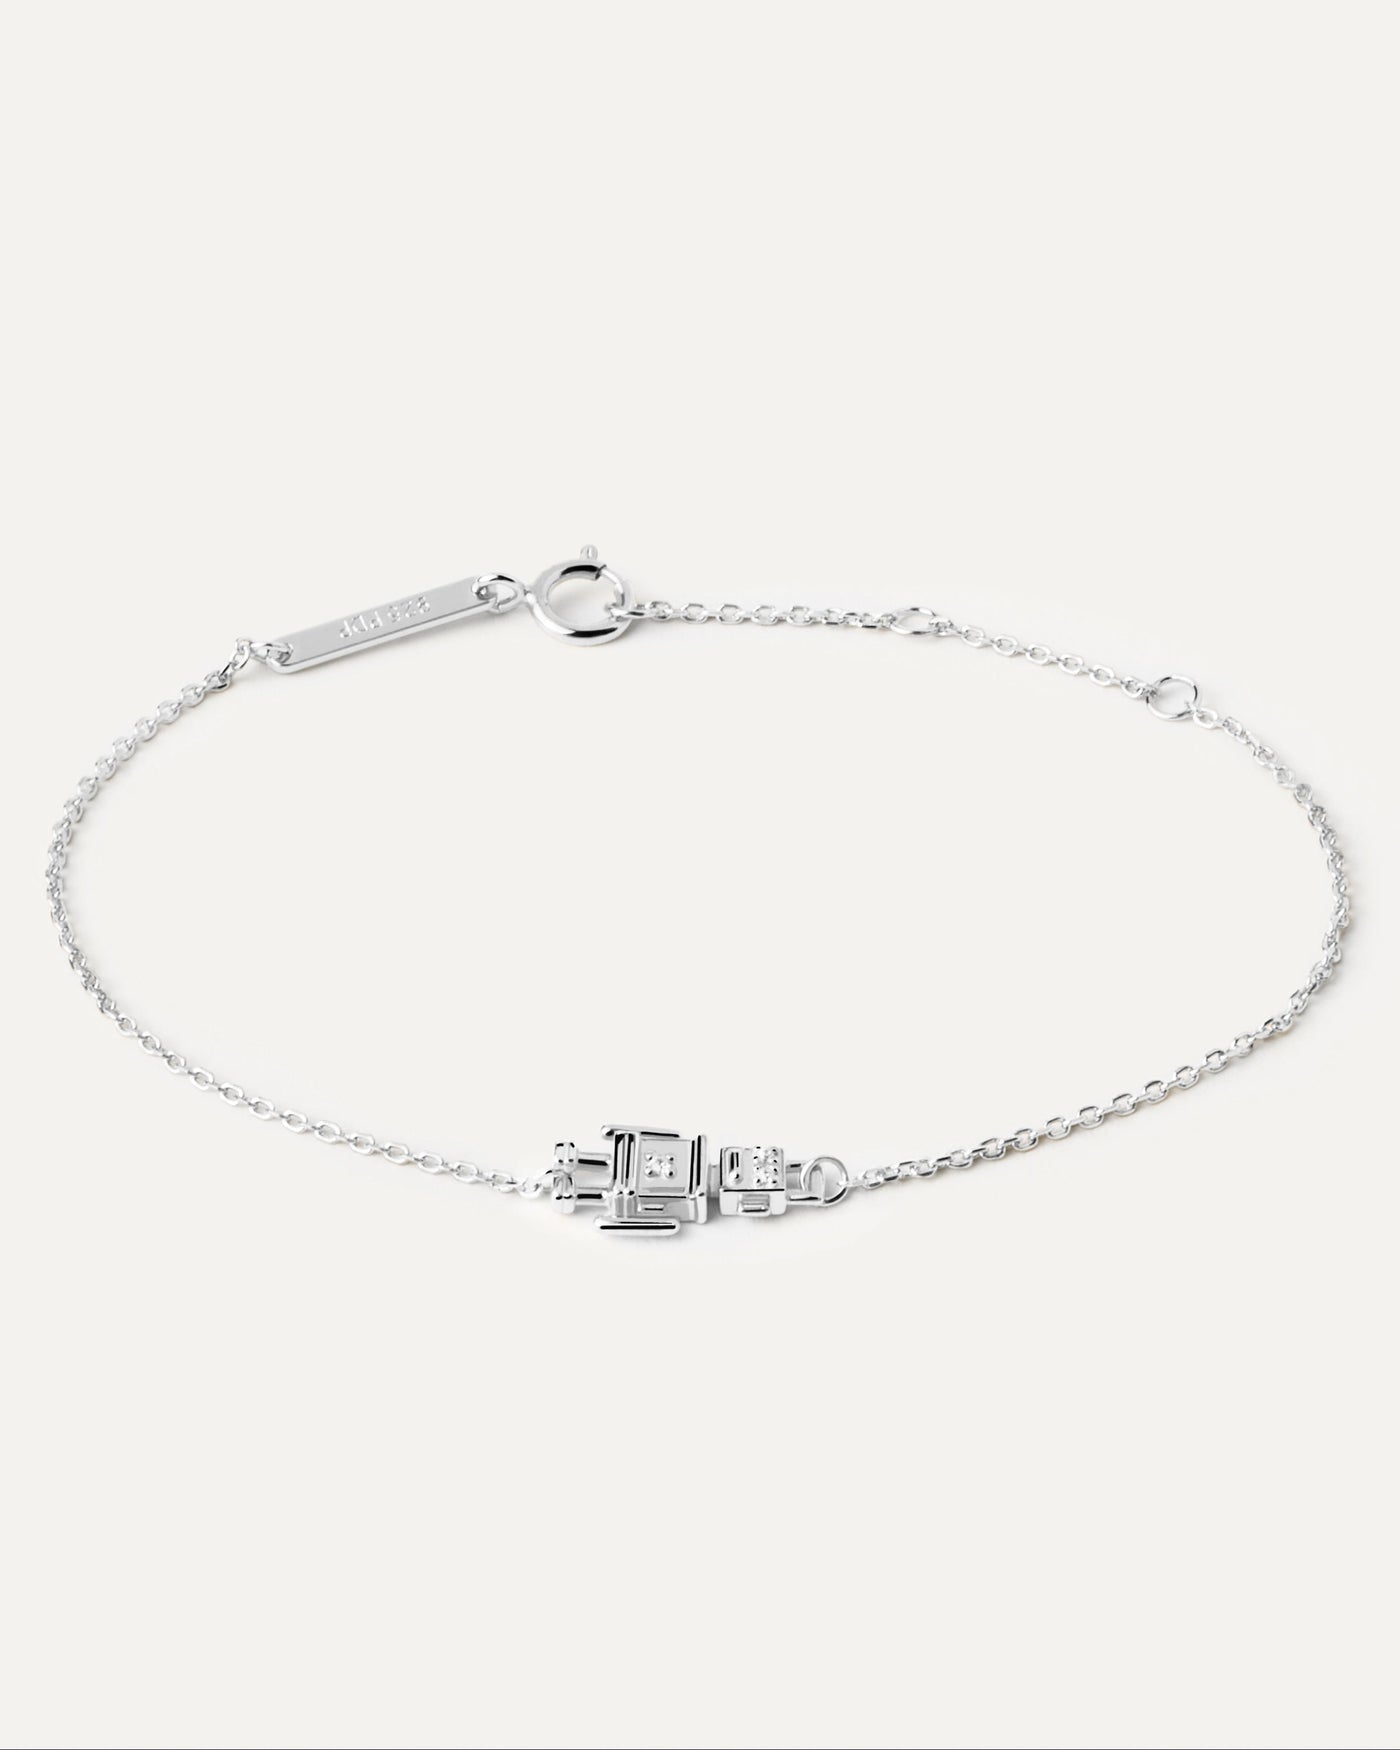 2023 Selection | Robert Silver Bracelet. Dainty sterling silver bracelet with a robot motive. Get the latest arrival from PDPAOLA. Place your order safely and get this Best Seller. Free Shipping.